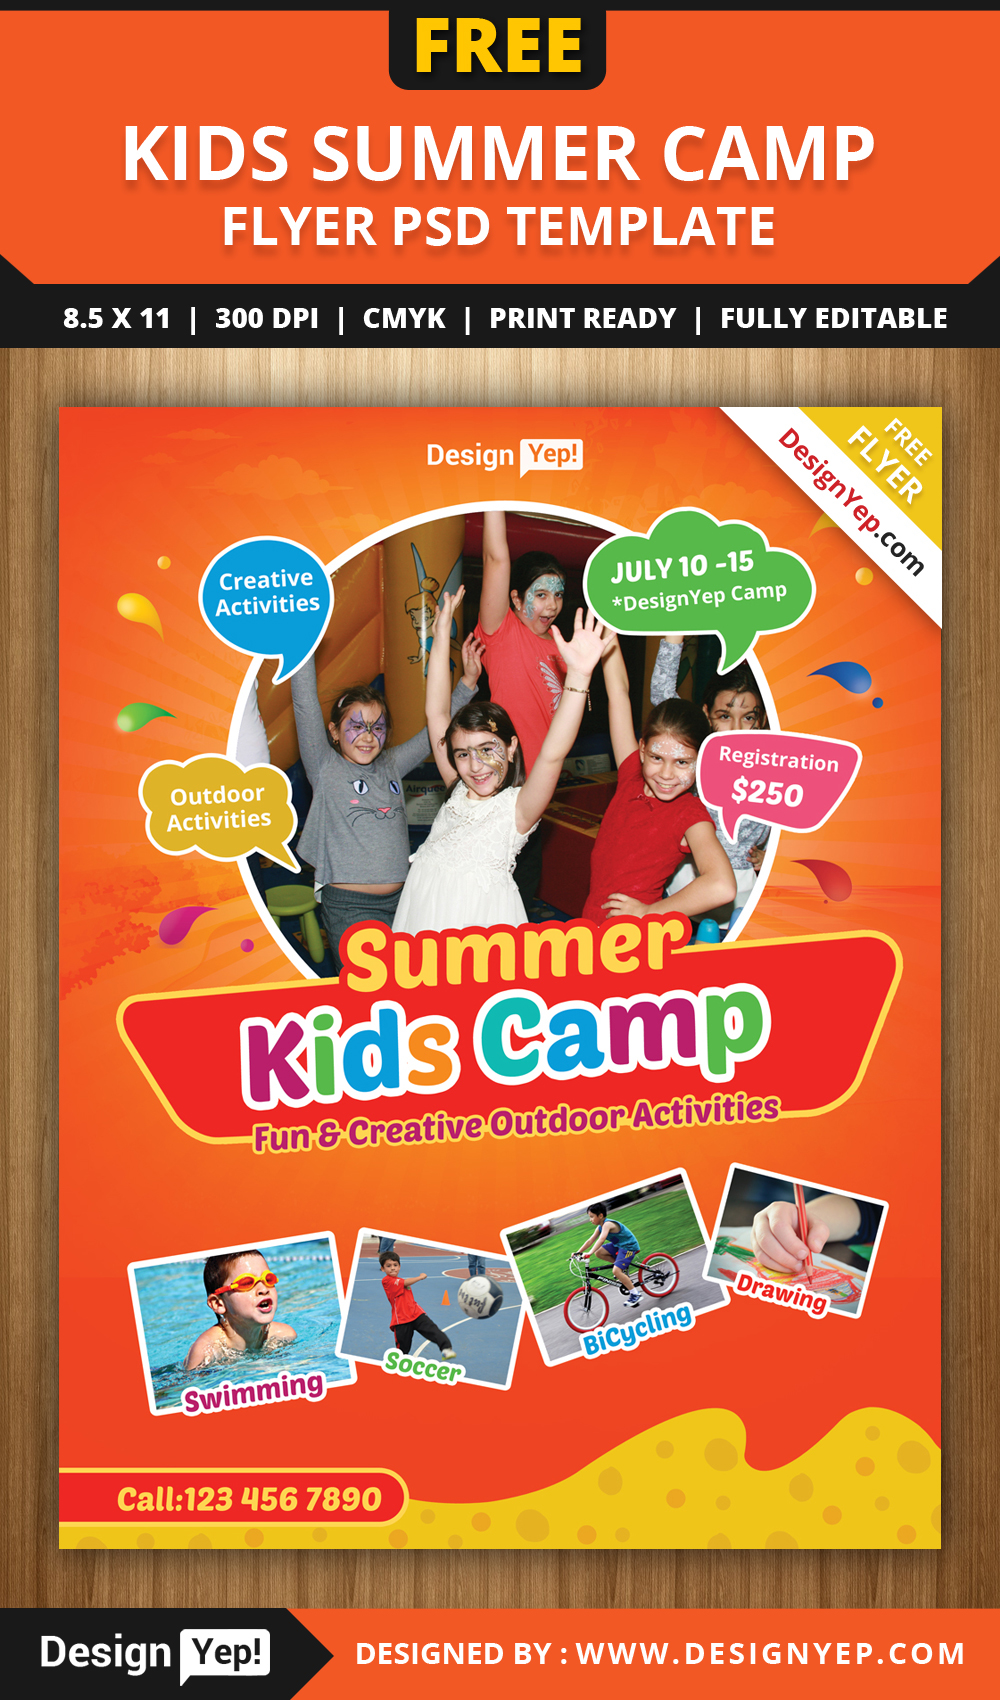 Free Kids Summer Camp Flyer PSD Template on Behance With Regard To Free Summer Camp Flyer Template